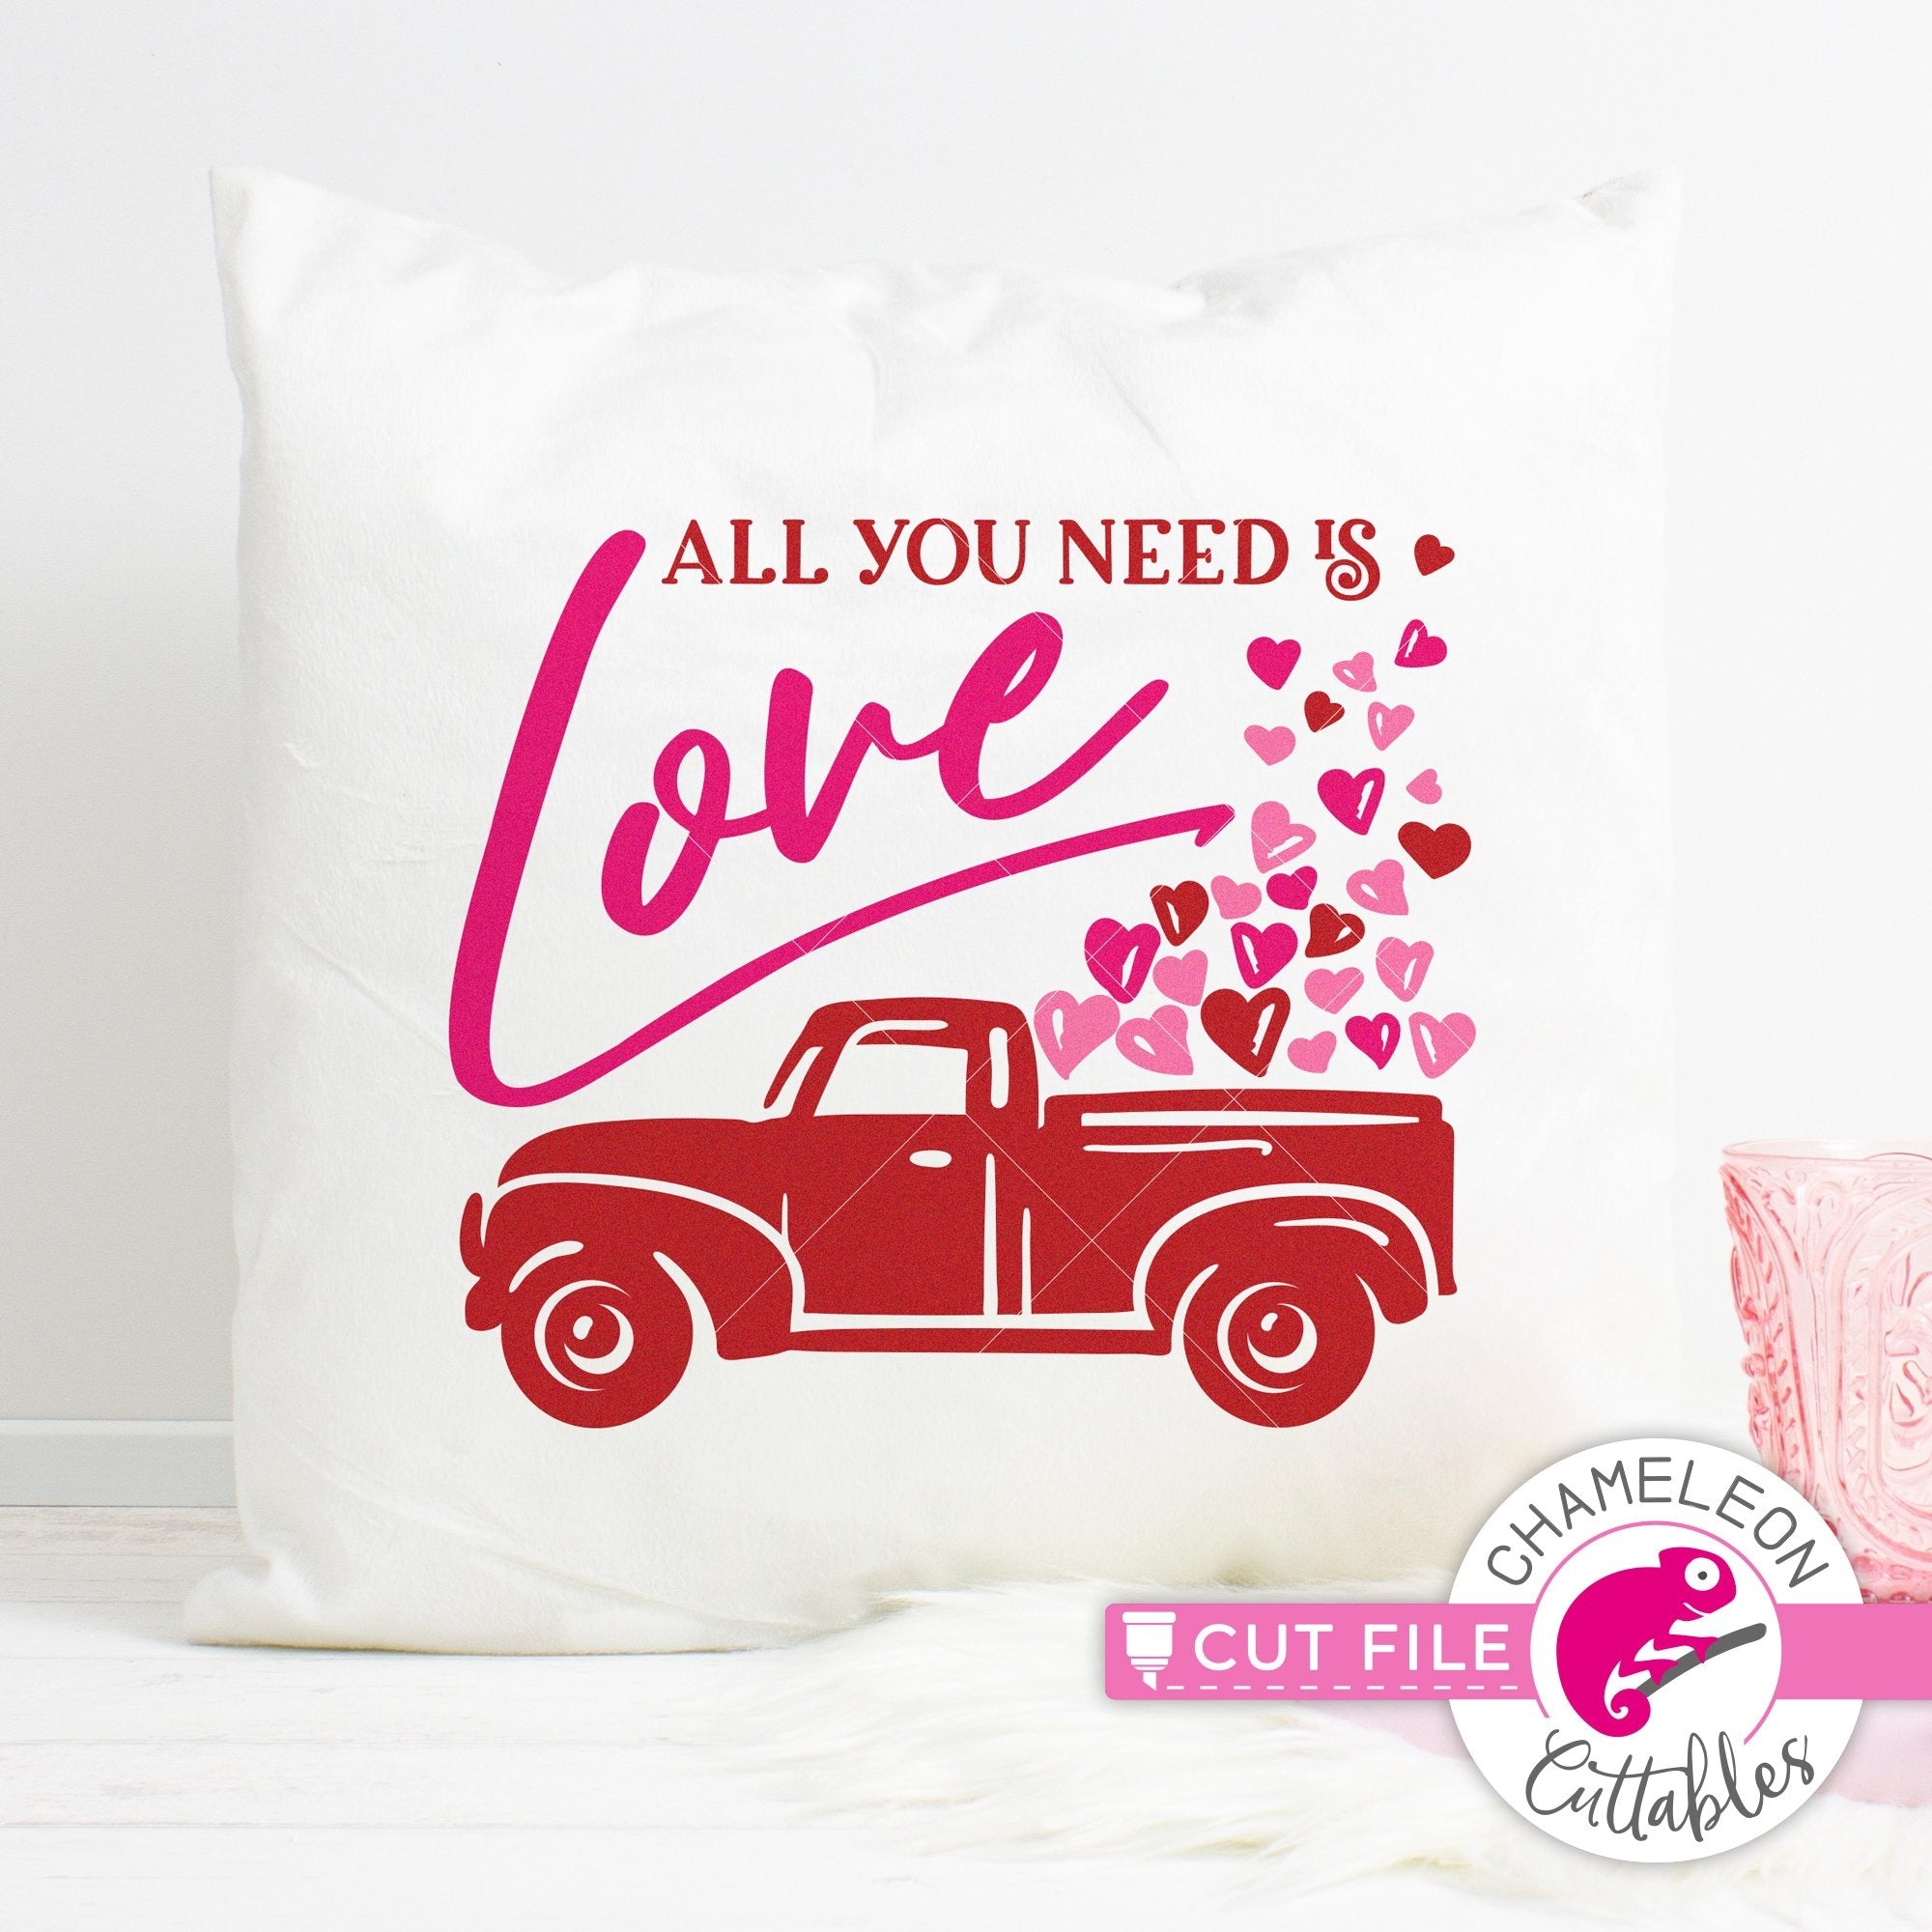 All You Need Is Love Truck Valentine S Day Svg Png Dxf Eps Jpeg Chameleon Cuttables Llc Chameleon Cuttables Llc